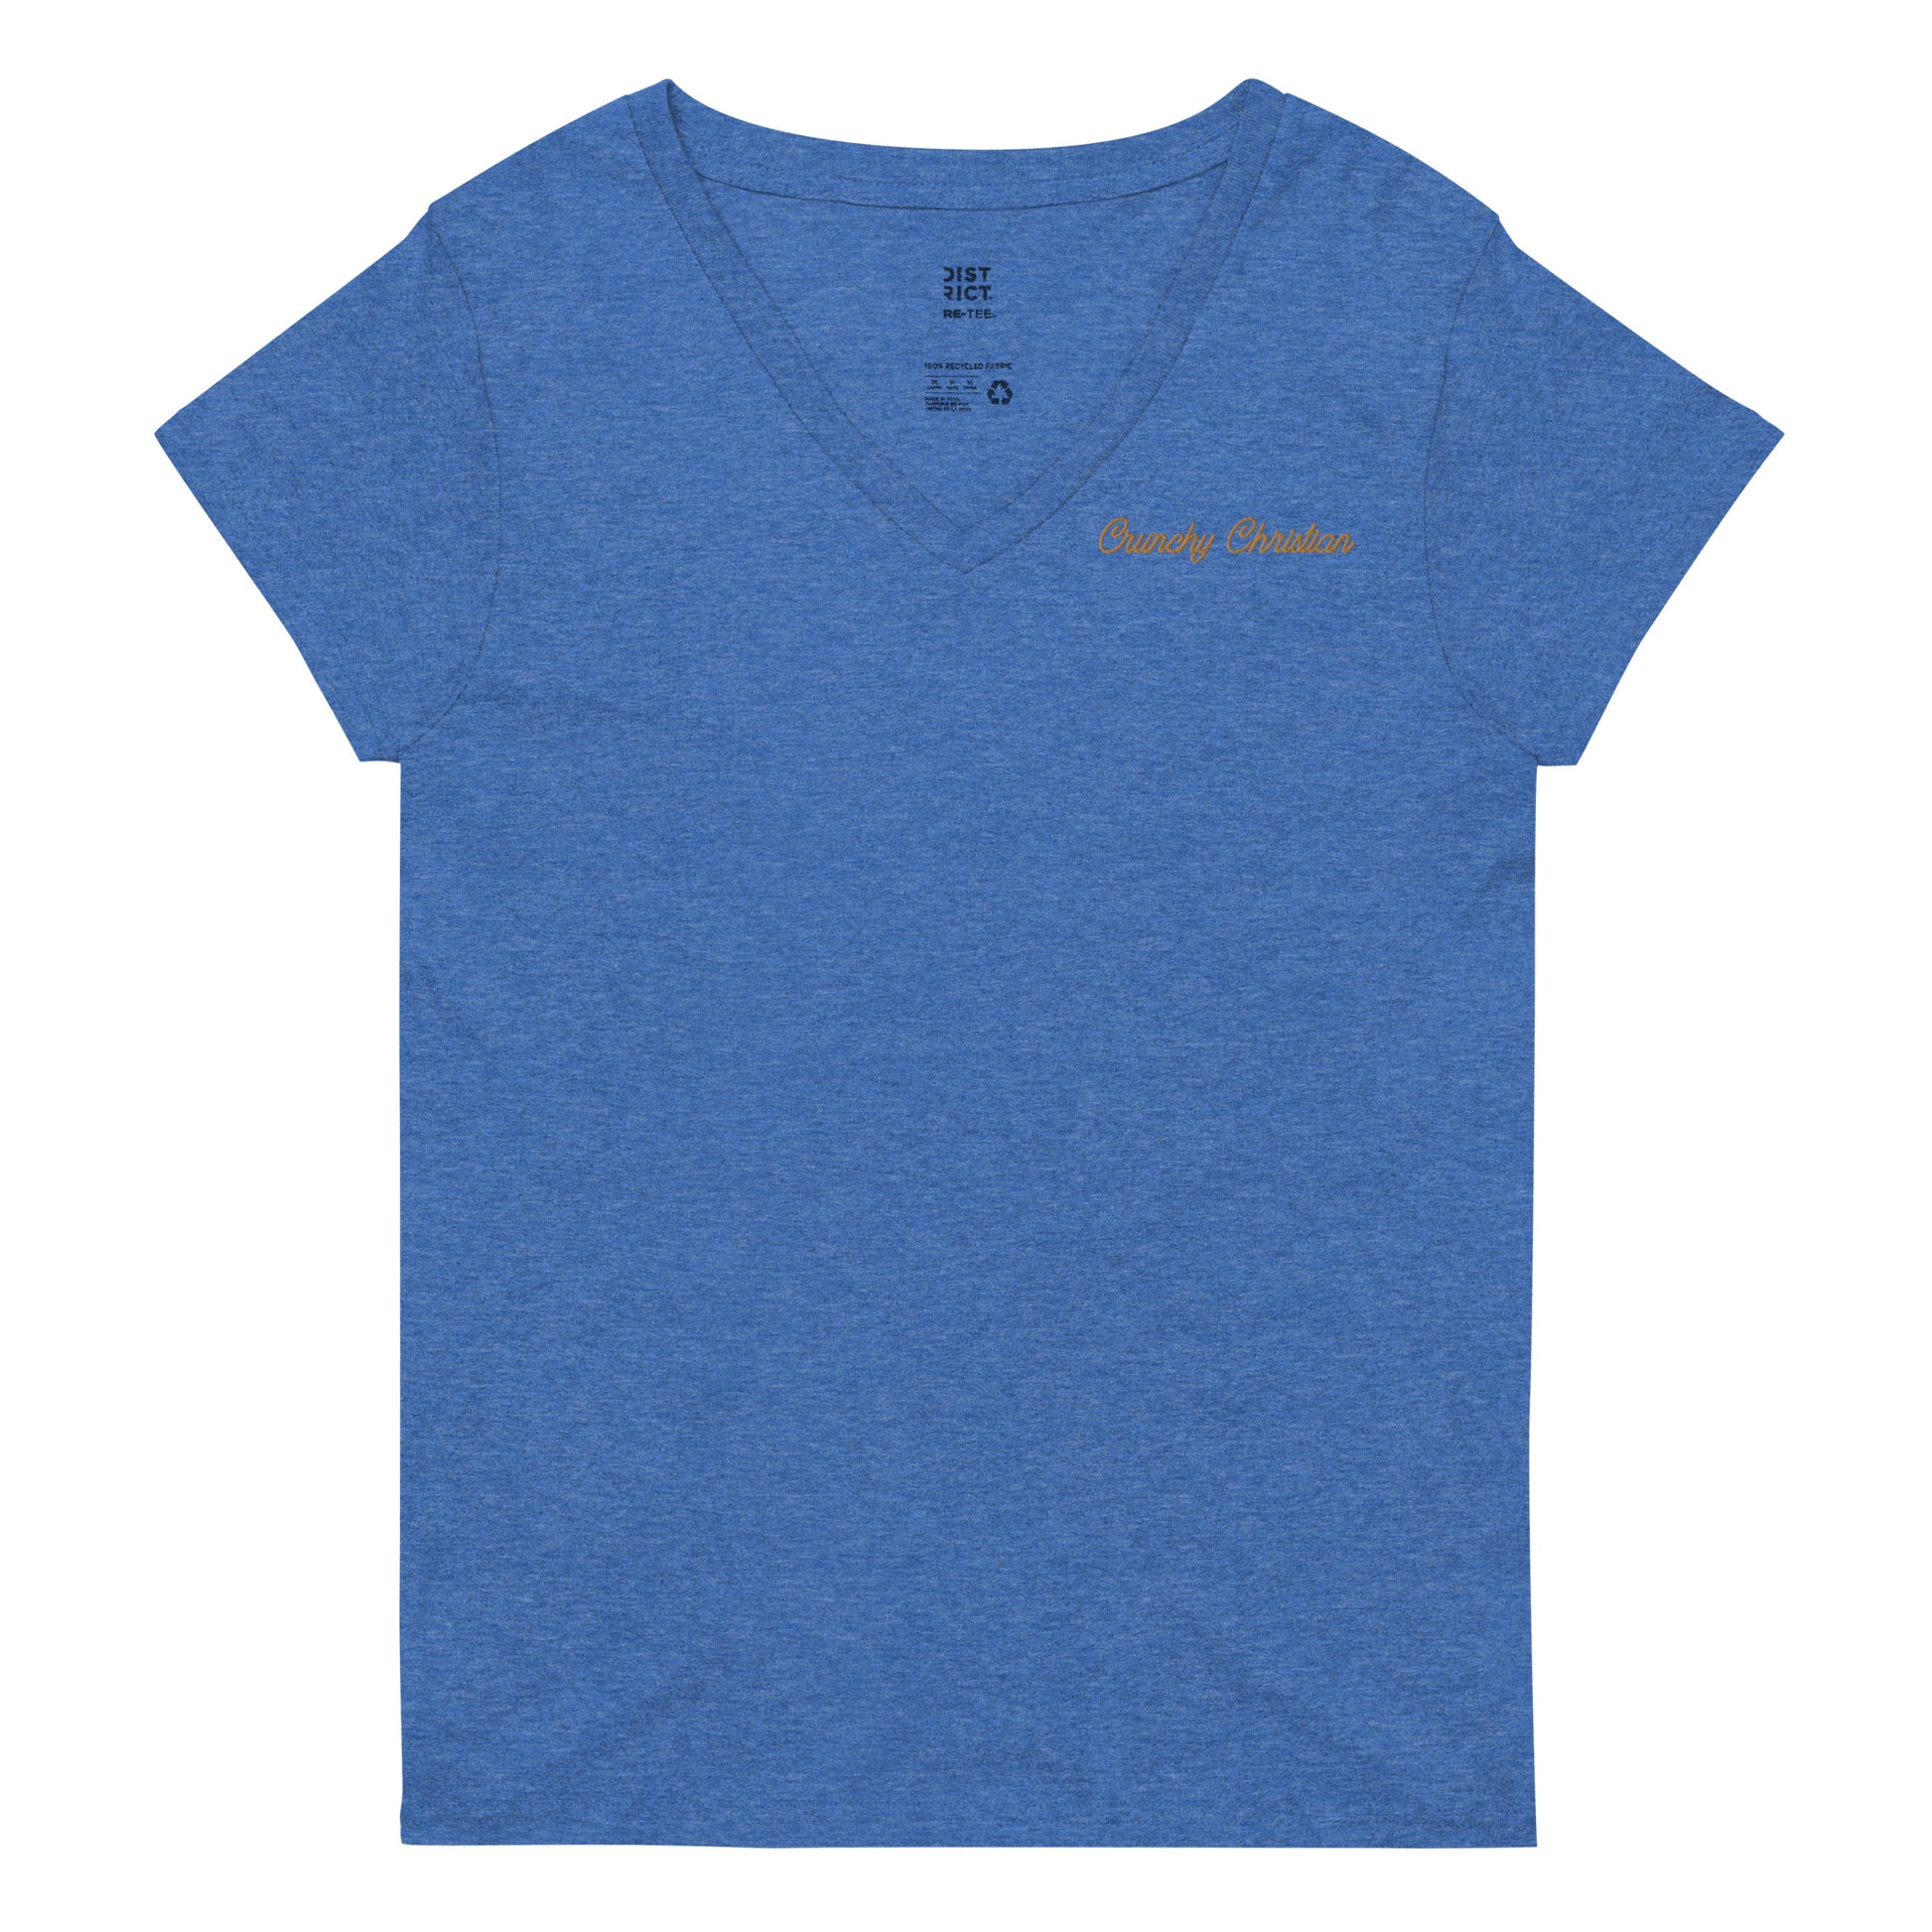 Women’s Recycled V-Neck T-Shirt - TWCC - A Thousand Elsewhere